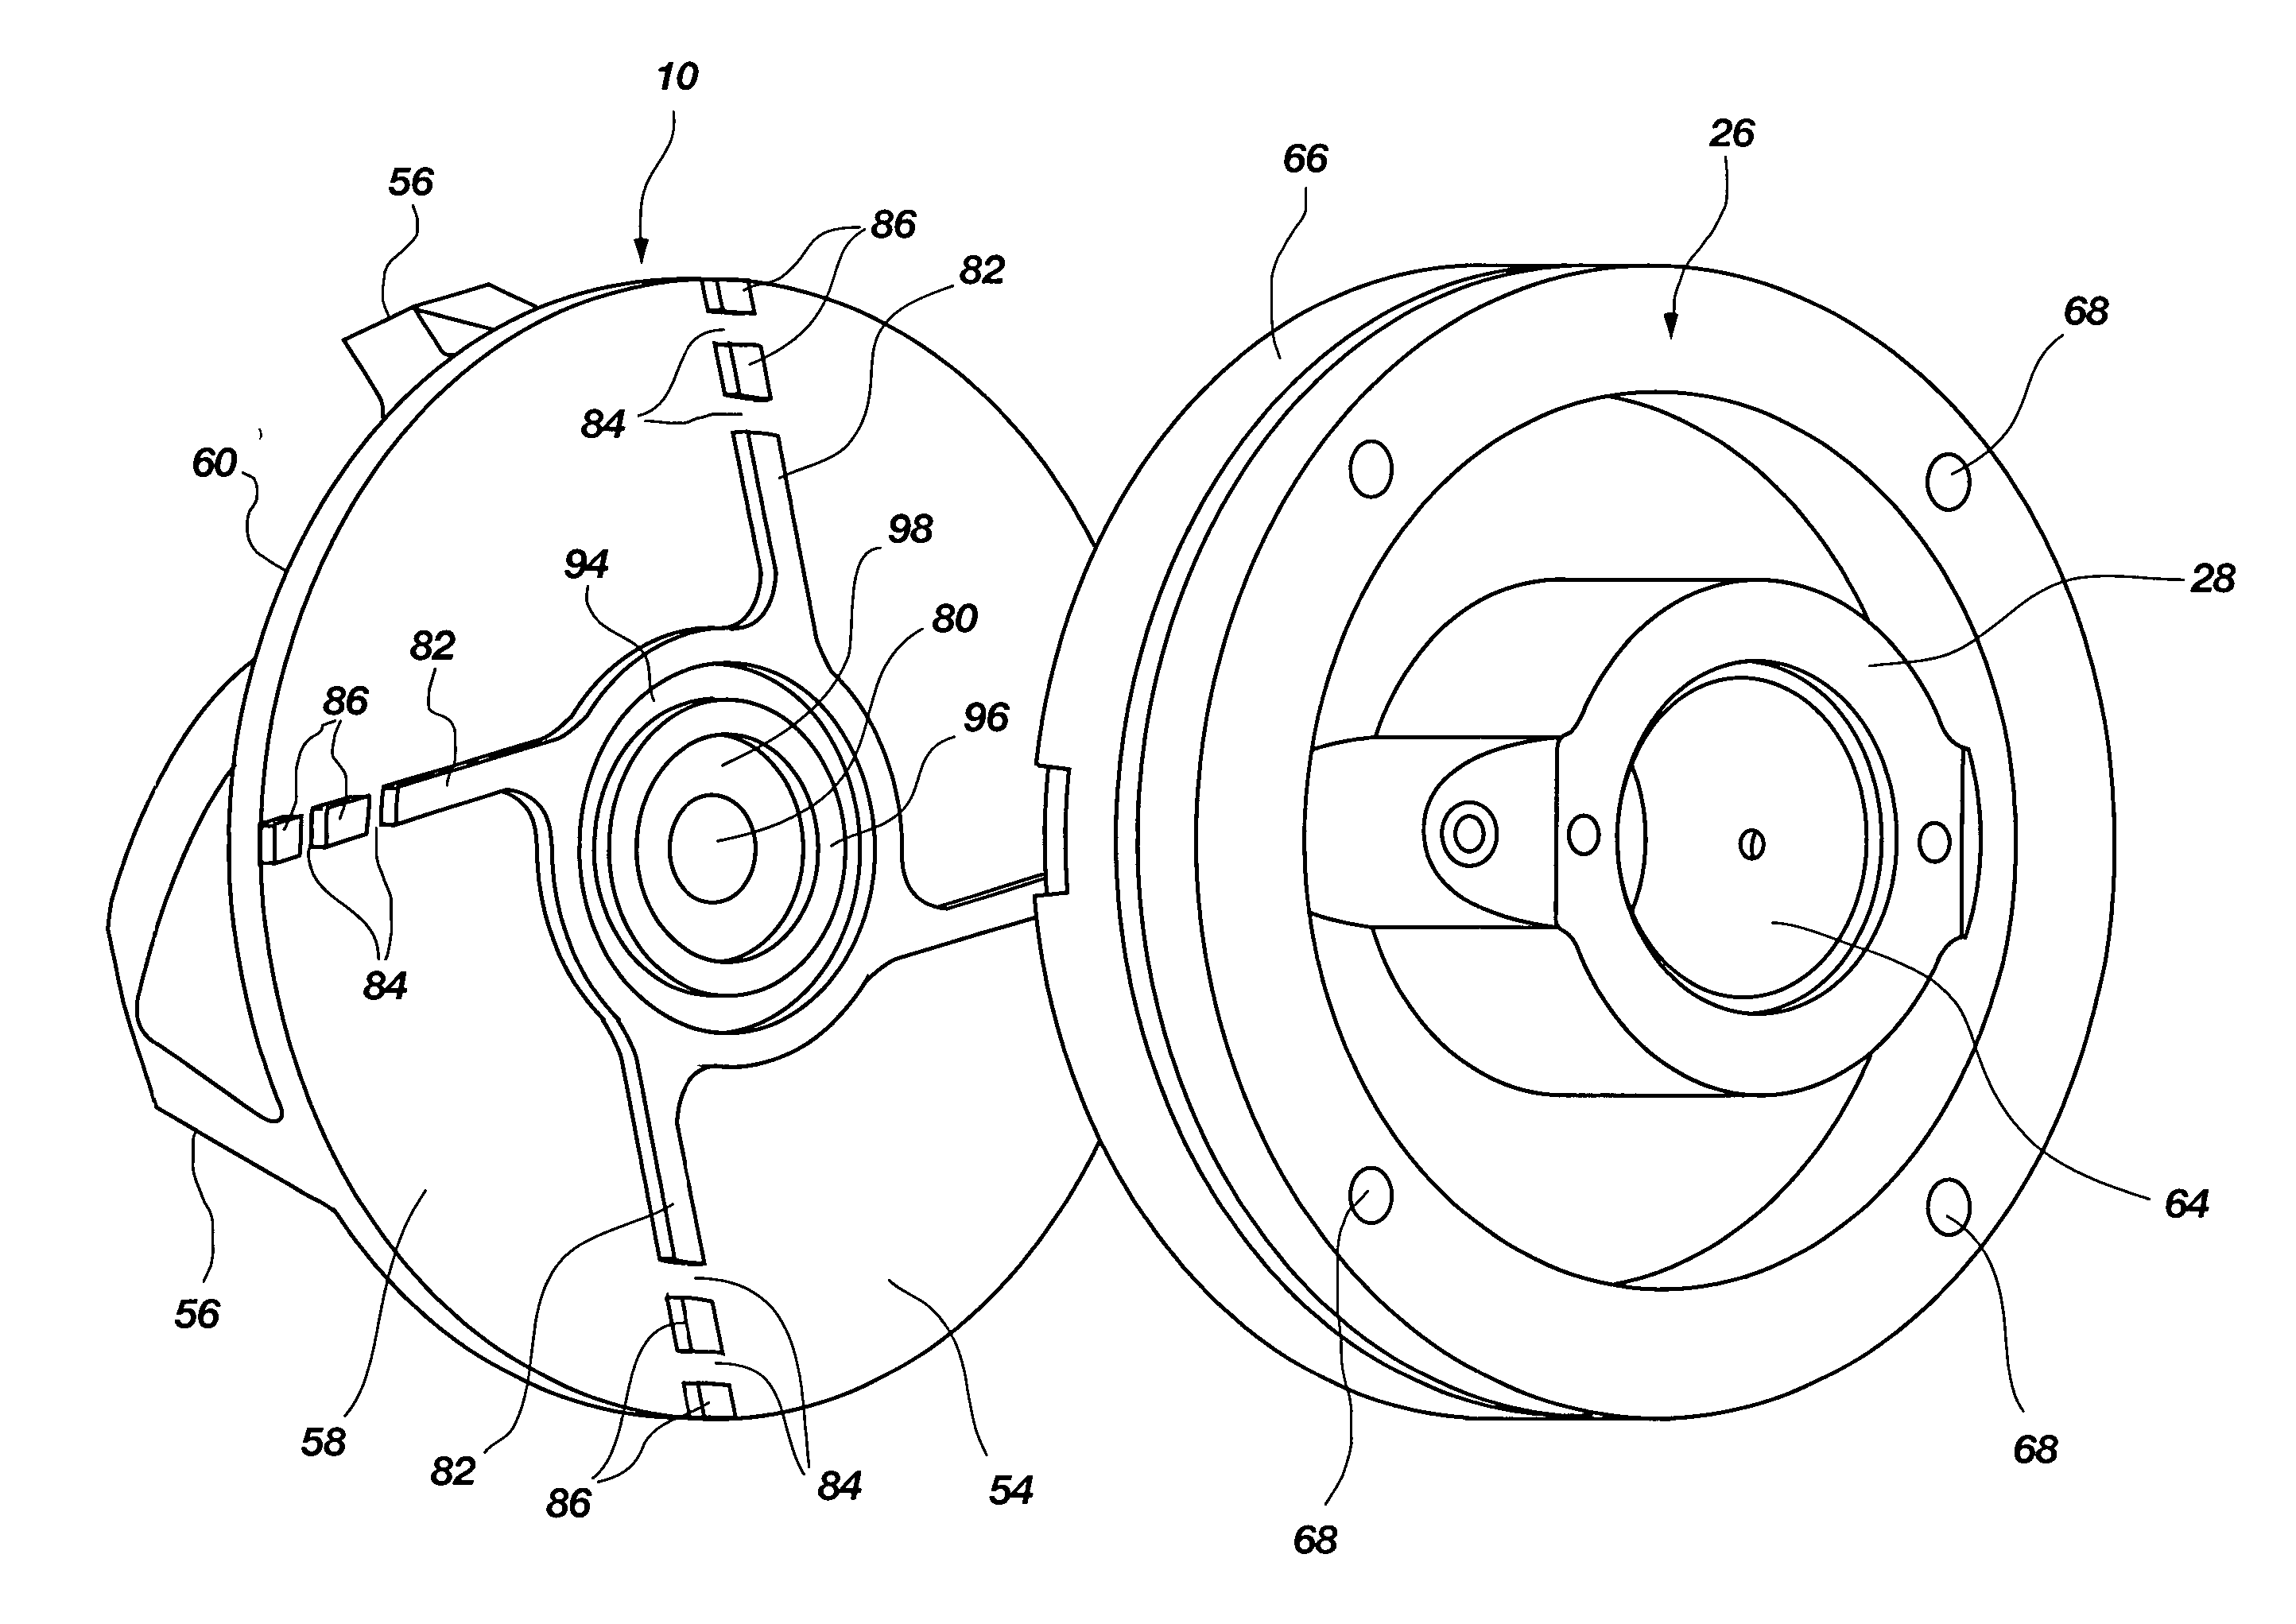 Impeller and cutting elements for centrifugal chopper pumps